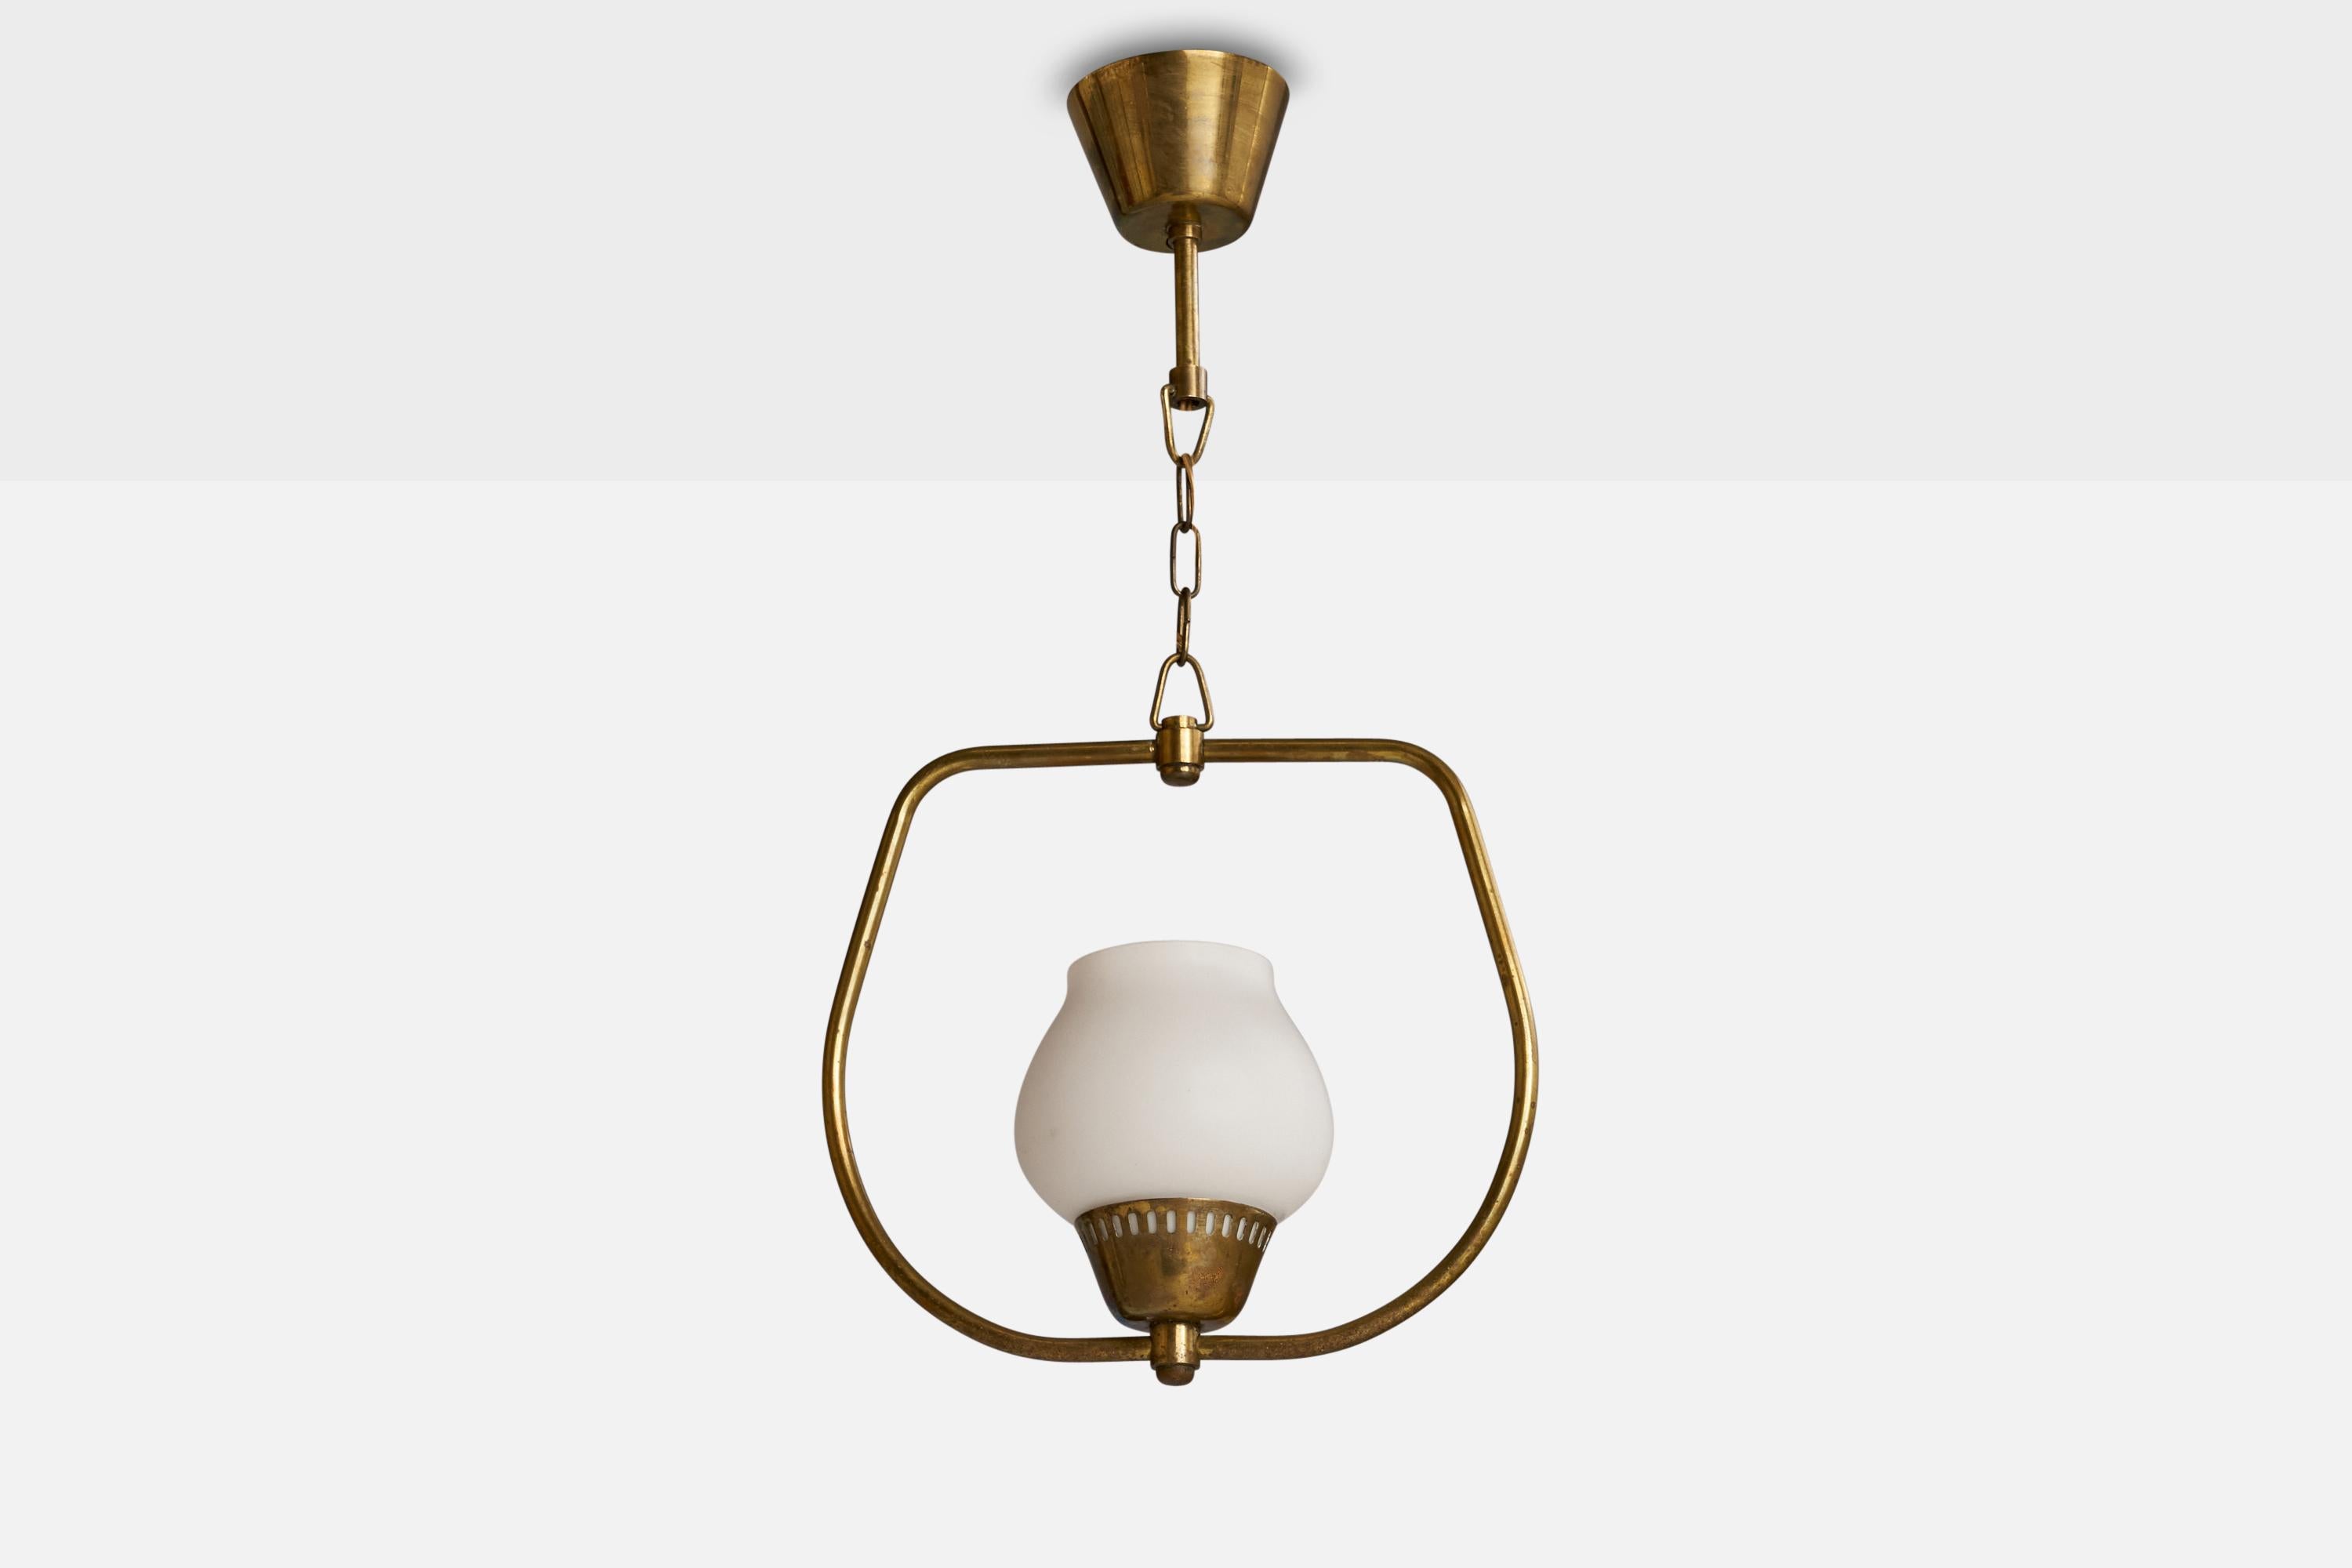 A brass and opaline glass pendant light designed and produced in Sweden, 1940s.

Dimensions of canopy (inches): 2.25” H x 3.5” Diameter
Socket takes standard E-26 bulbs. 1 socket.There is no maximum wattage stated on the fixture. All lighting will